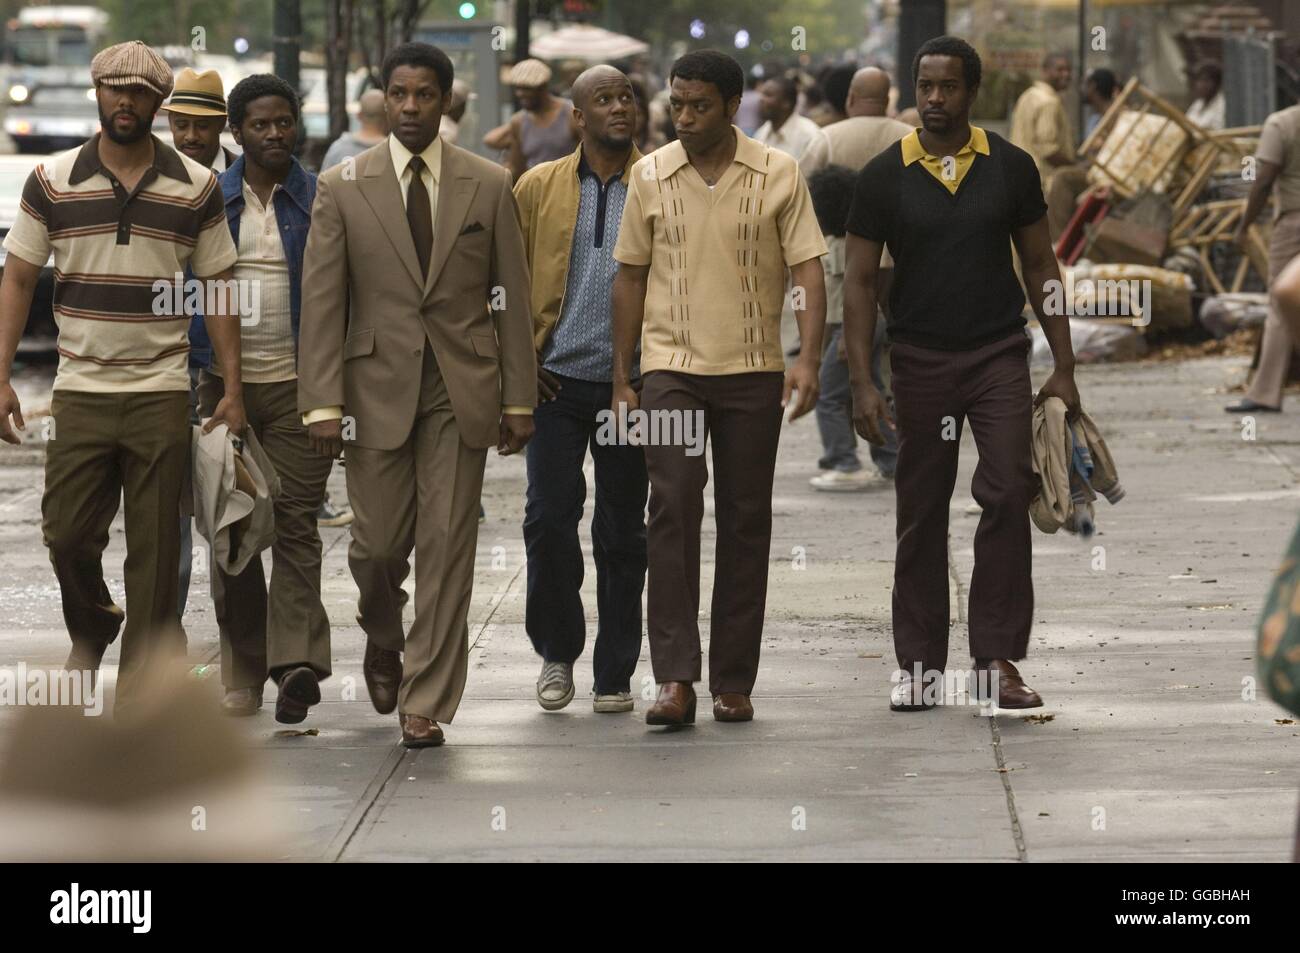 American Gangster / The Lucas Brothers including (L to R, Foreground) Turner (COMMON), Melvin (WARNER MILLER), Frank (DENZEL WASHINGTON), Dexter (J. KYLE MANZAY), Huey (CHIWETEL EJIOFOR) and Terrence (ALBERT JONES) Regie: Ridley Scott aka. American Gangster Stock Photo